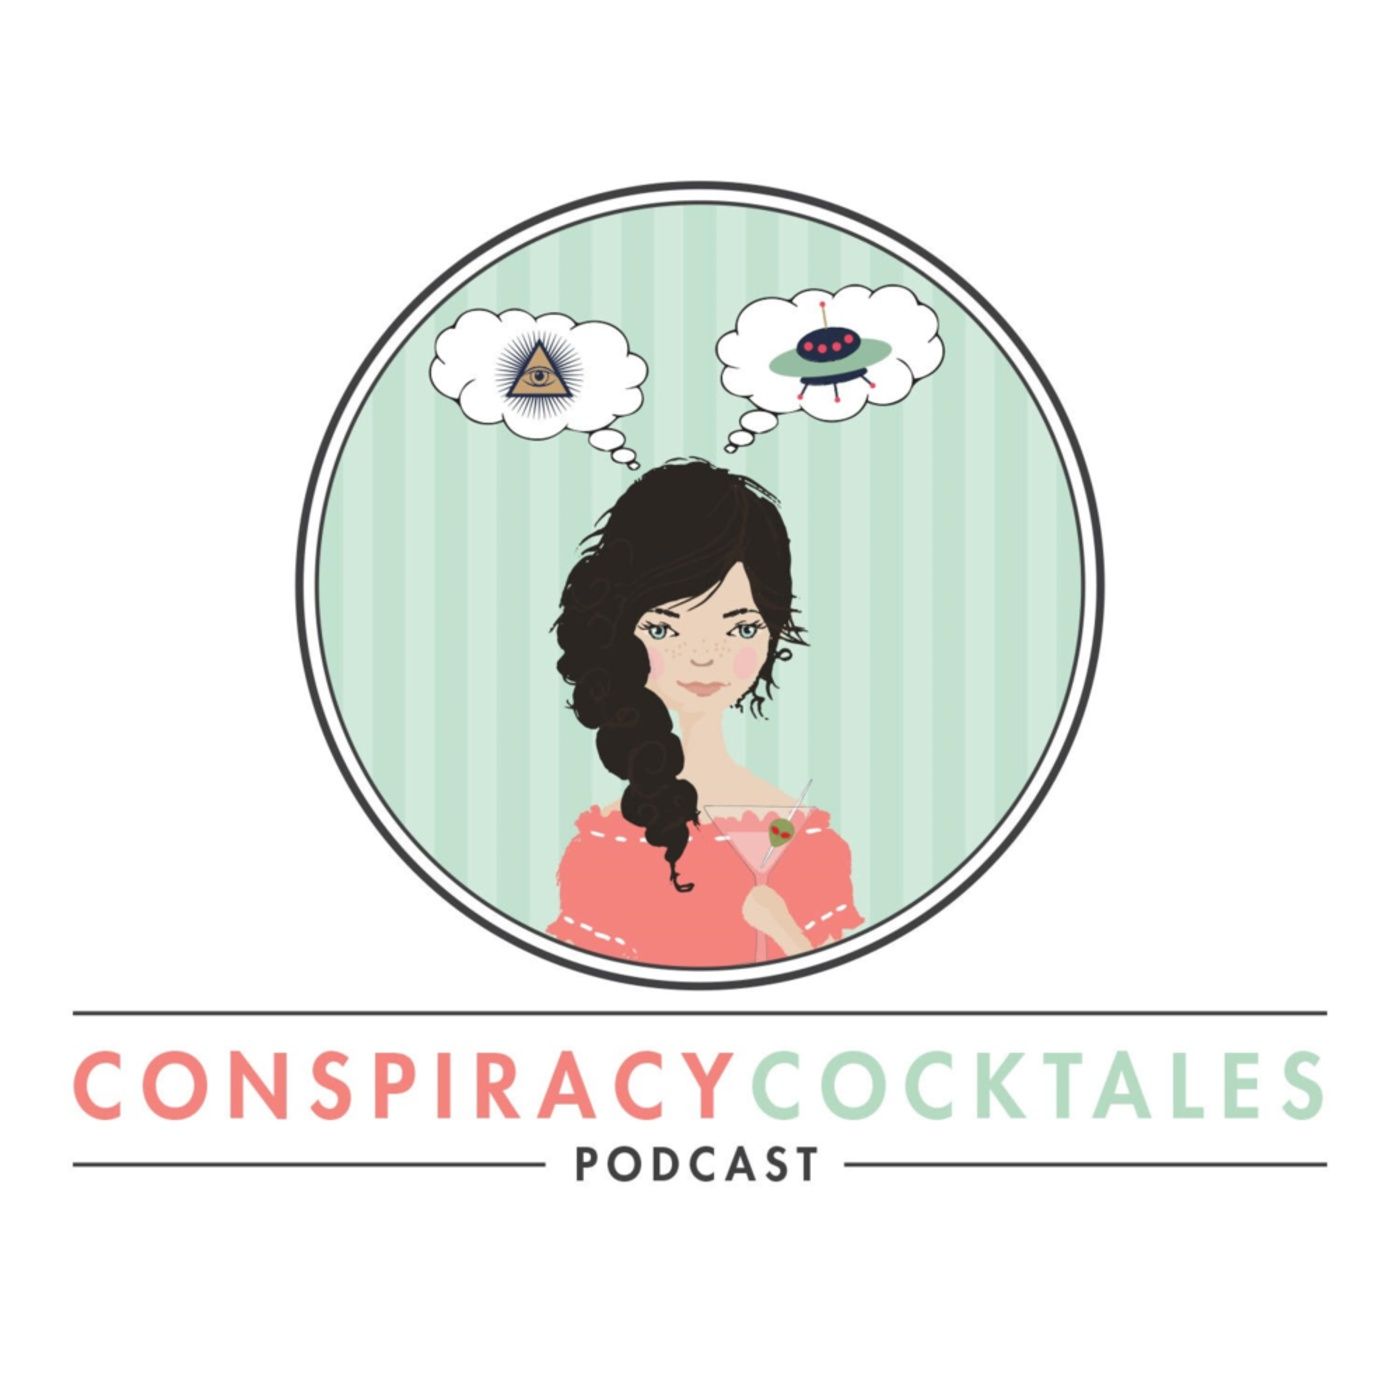 Conspiracy Cocktales Podcast